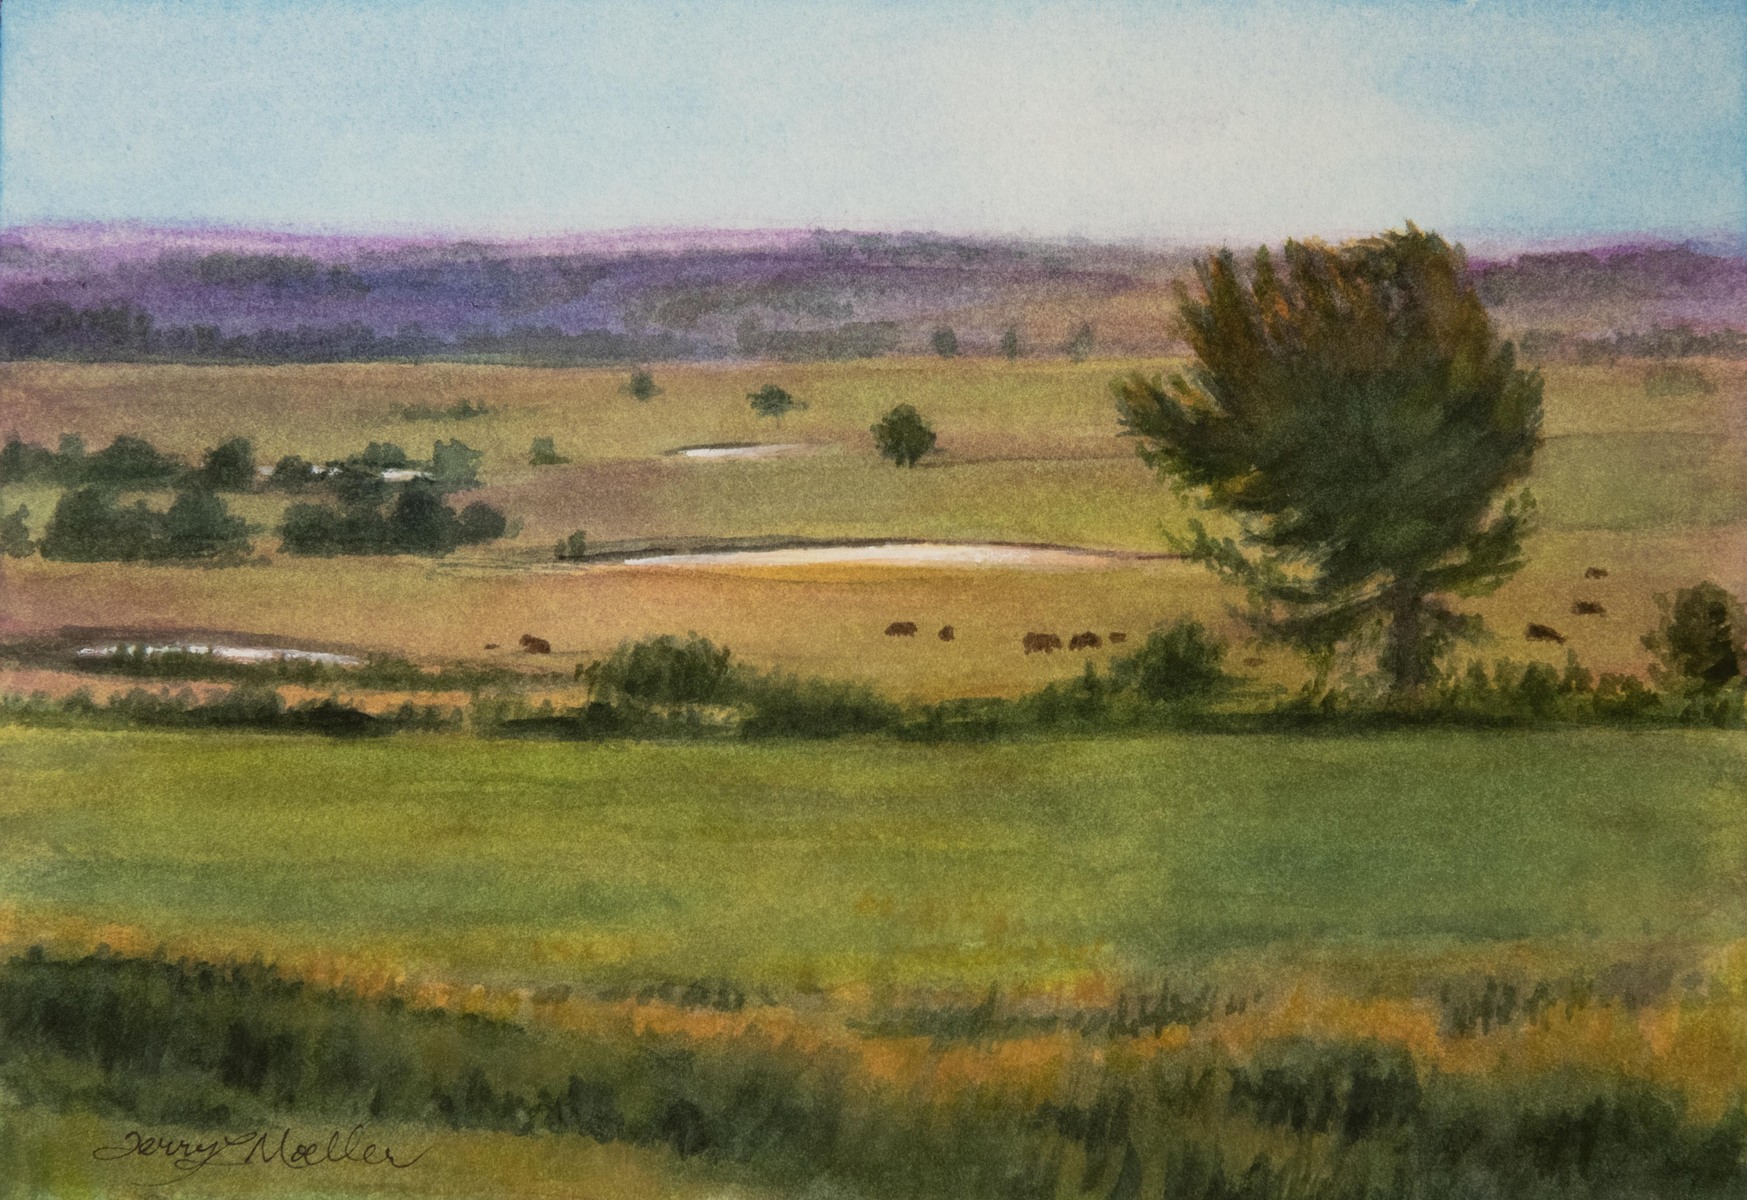 "My Parent's Ranch"  7" X 10"  watercolor on watercolor paper